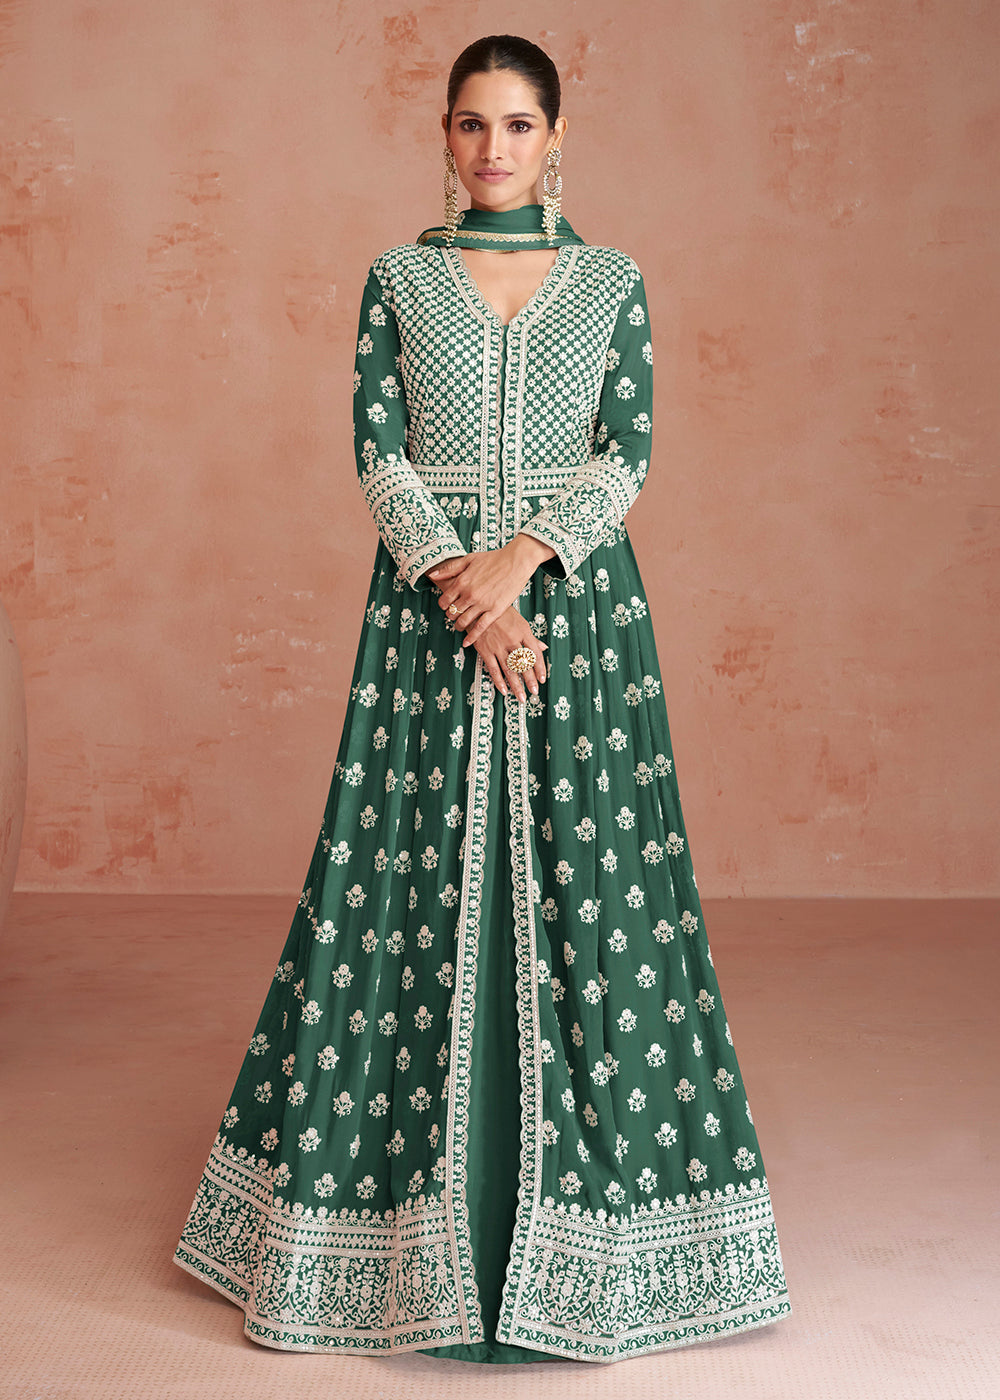 Buy Now Dusty Green Slit Style Embroidered Georgette Skirt Anarkali Suit Online in USA, UK, Australia, New Zealand, Canada, Italy & Worldwide at Empress Clothing.